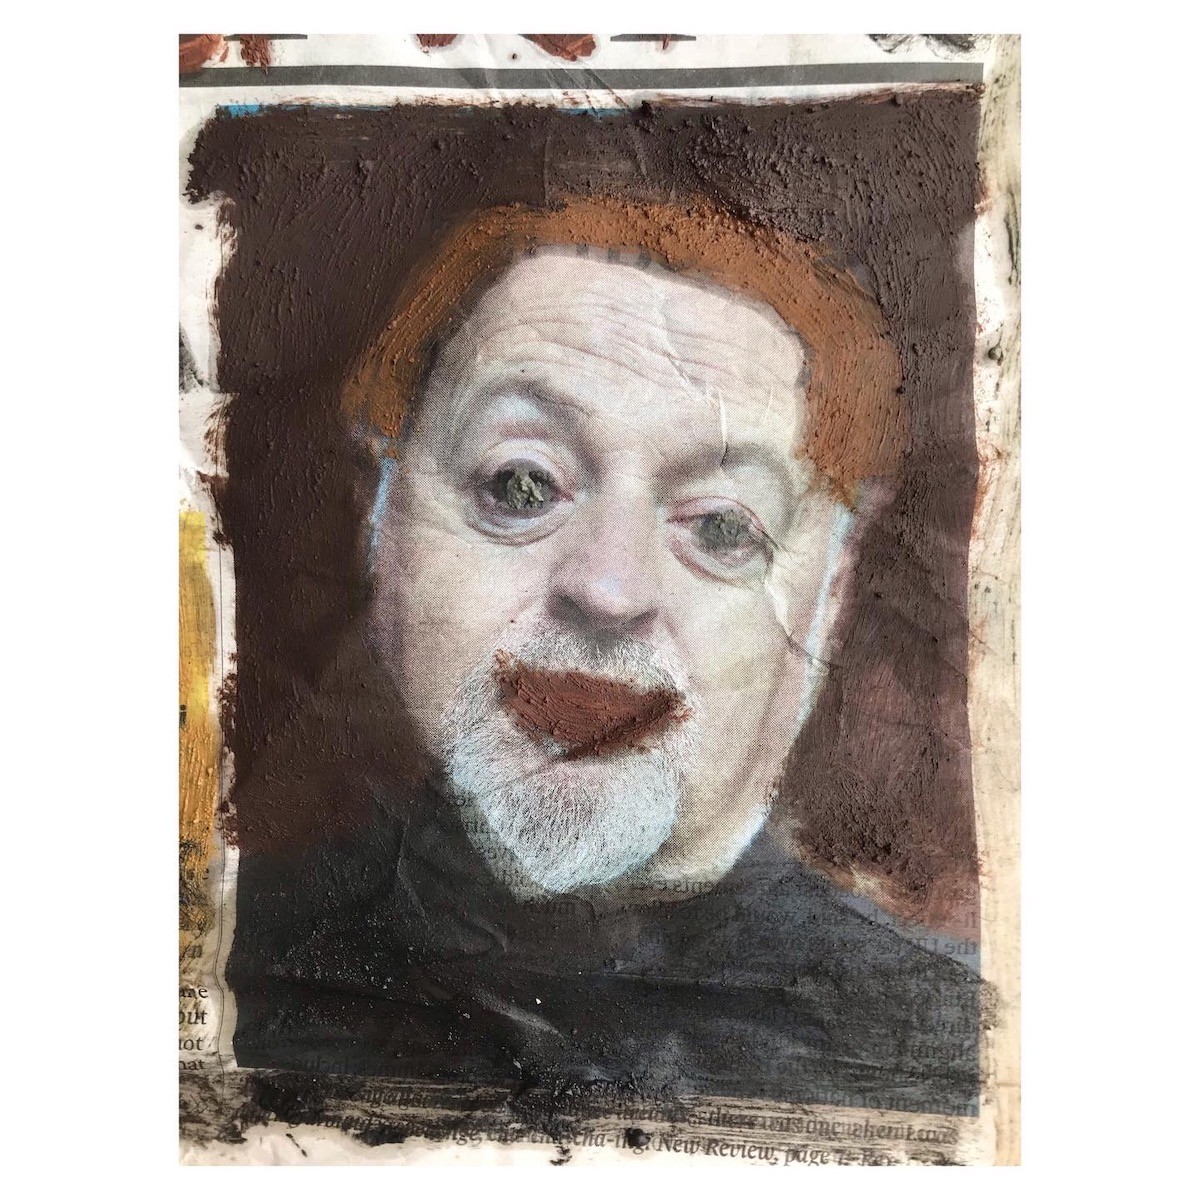 042 the observer - Bill Bailey (Cornish earth pigments and linseed oil on newspaper; 30x15cm)